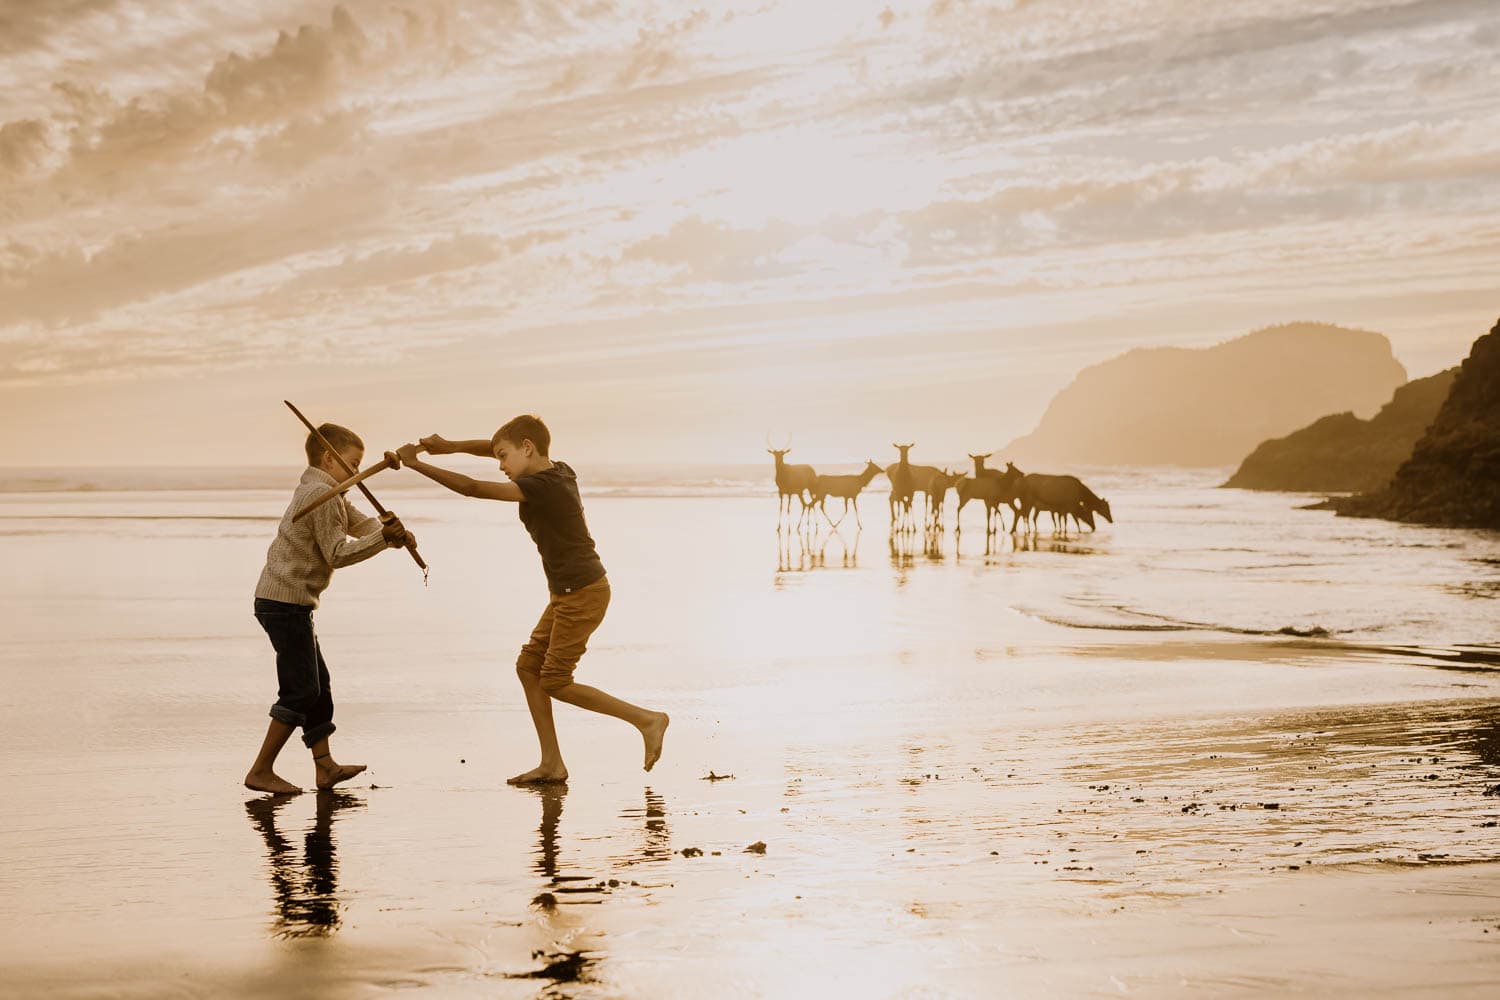 Two brothers play-fighting with wooden swords on the beach with elk behind them